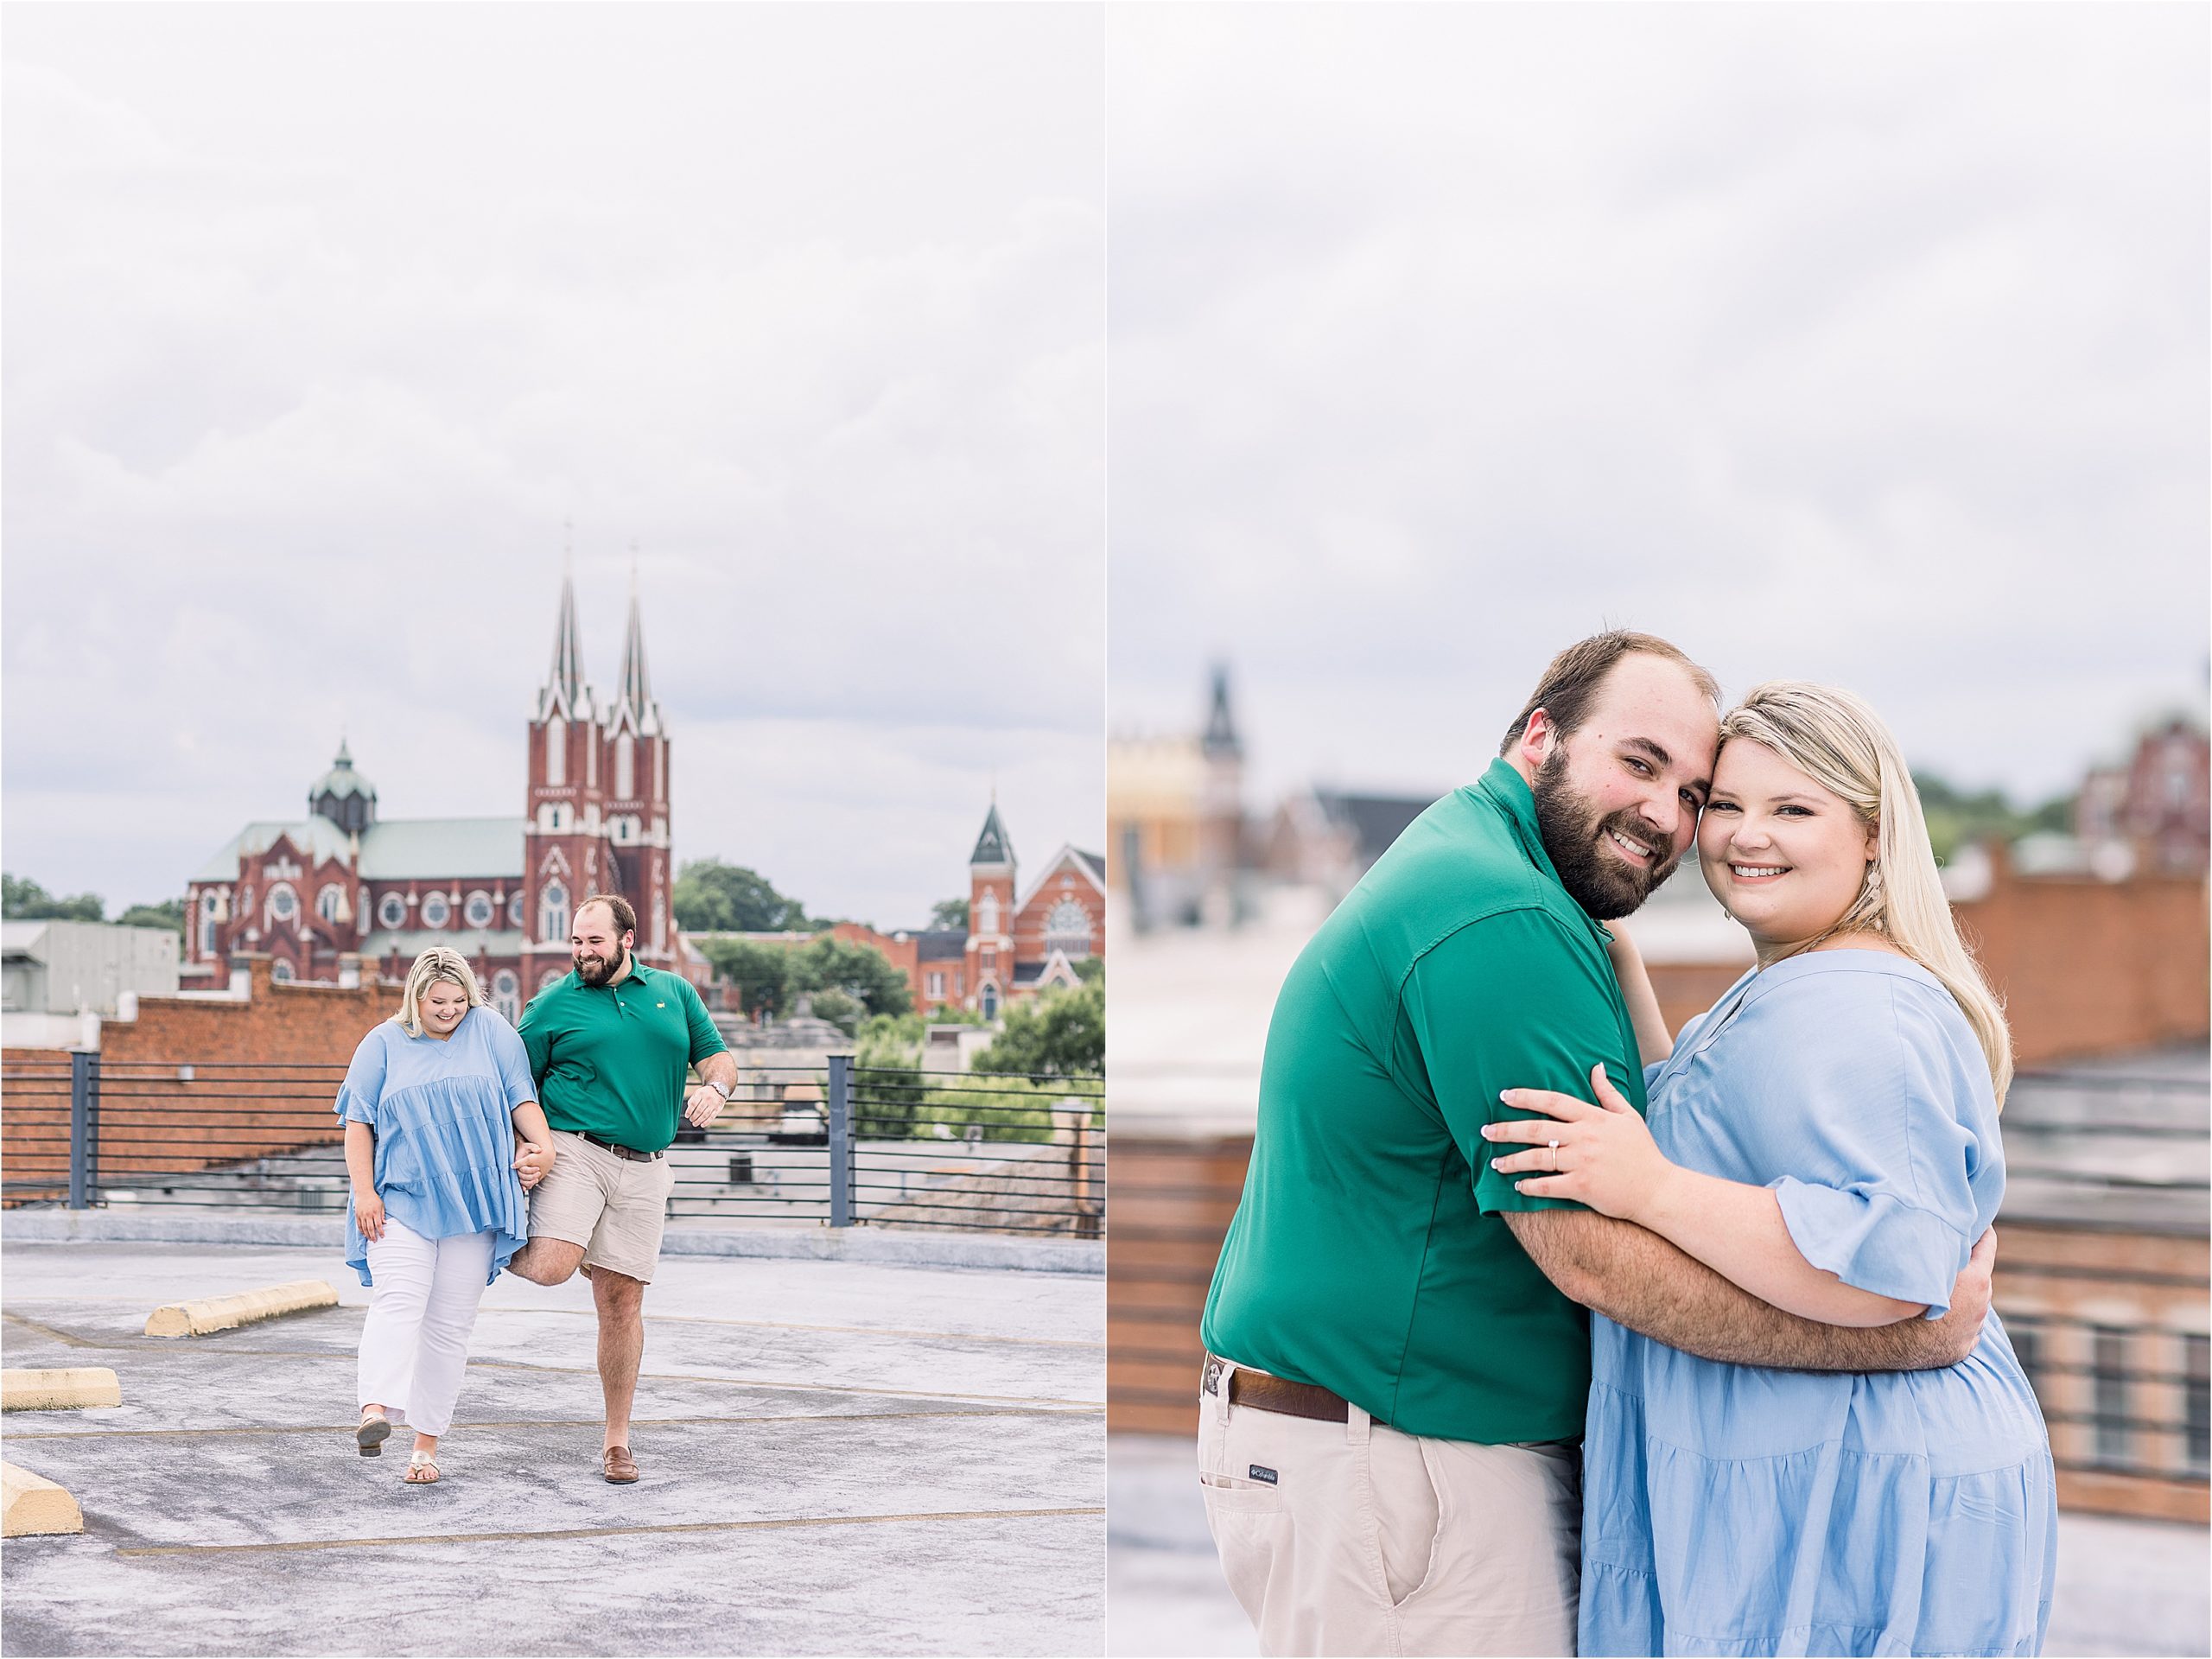 Engagement poses